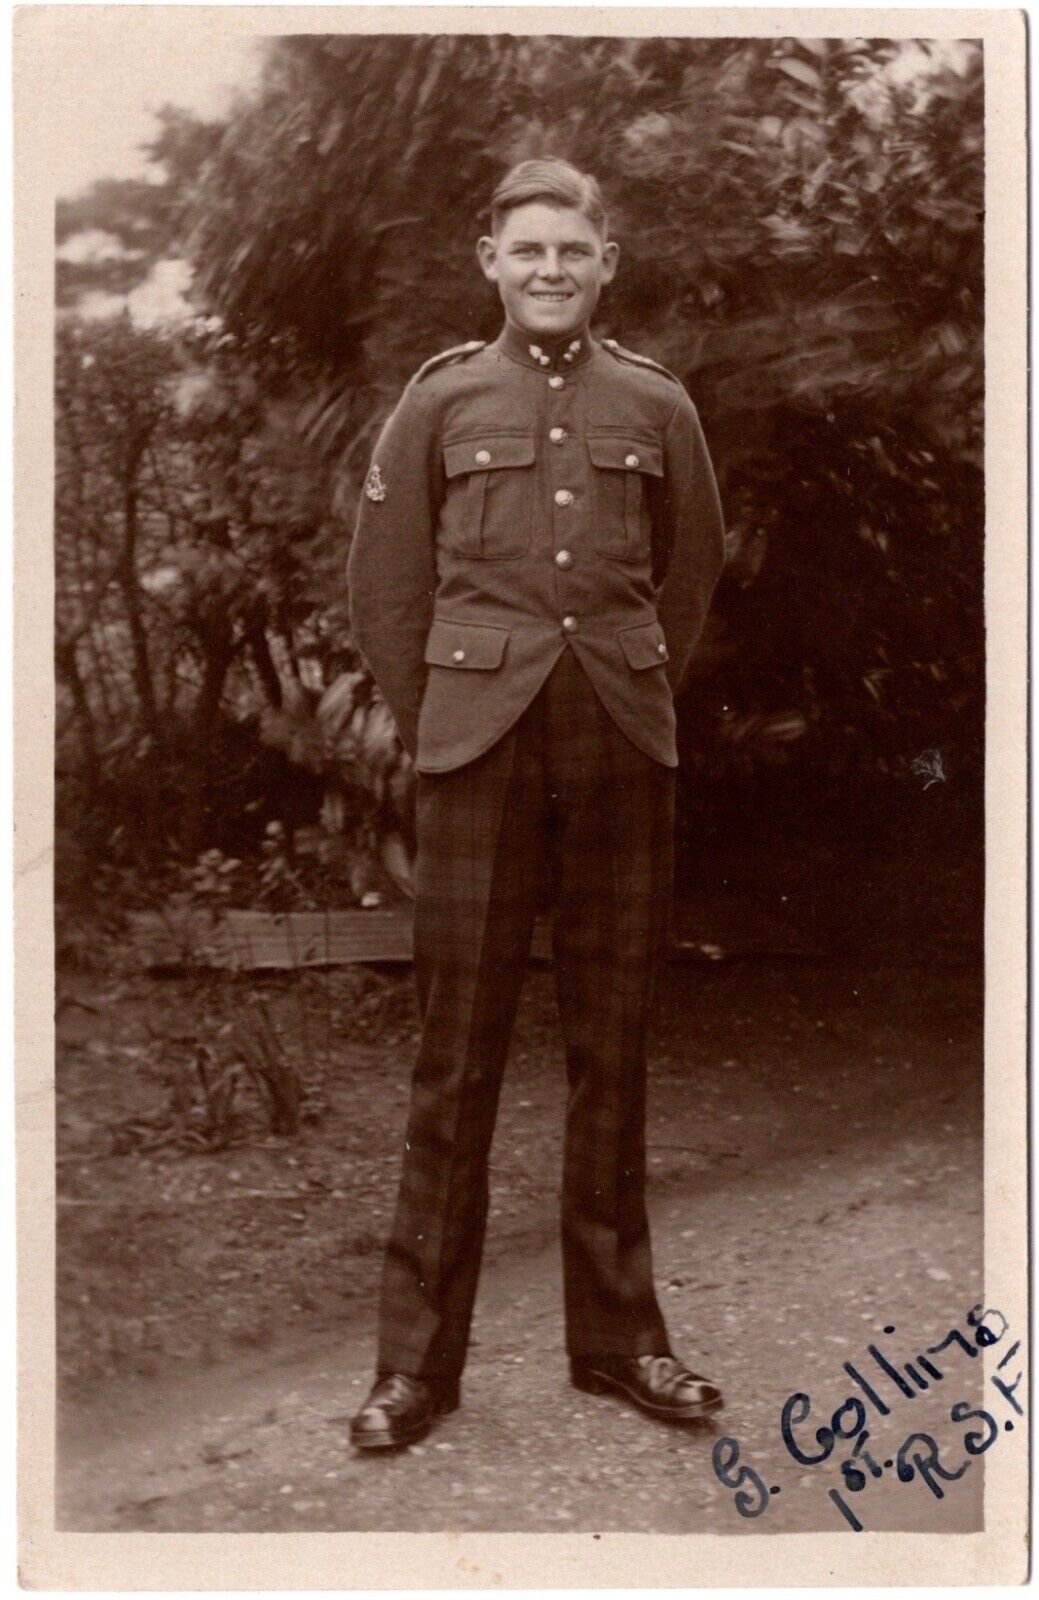 WWI 1914-18 Soldier G. Collins 1st Royal Scottish Fusiliers Real Photo Postcard